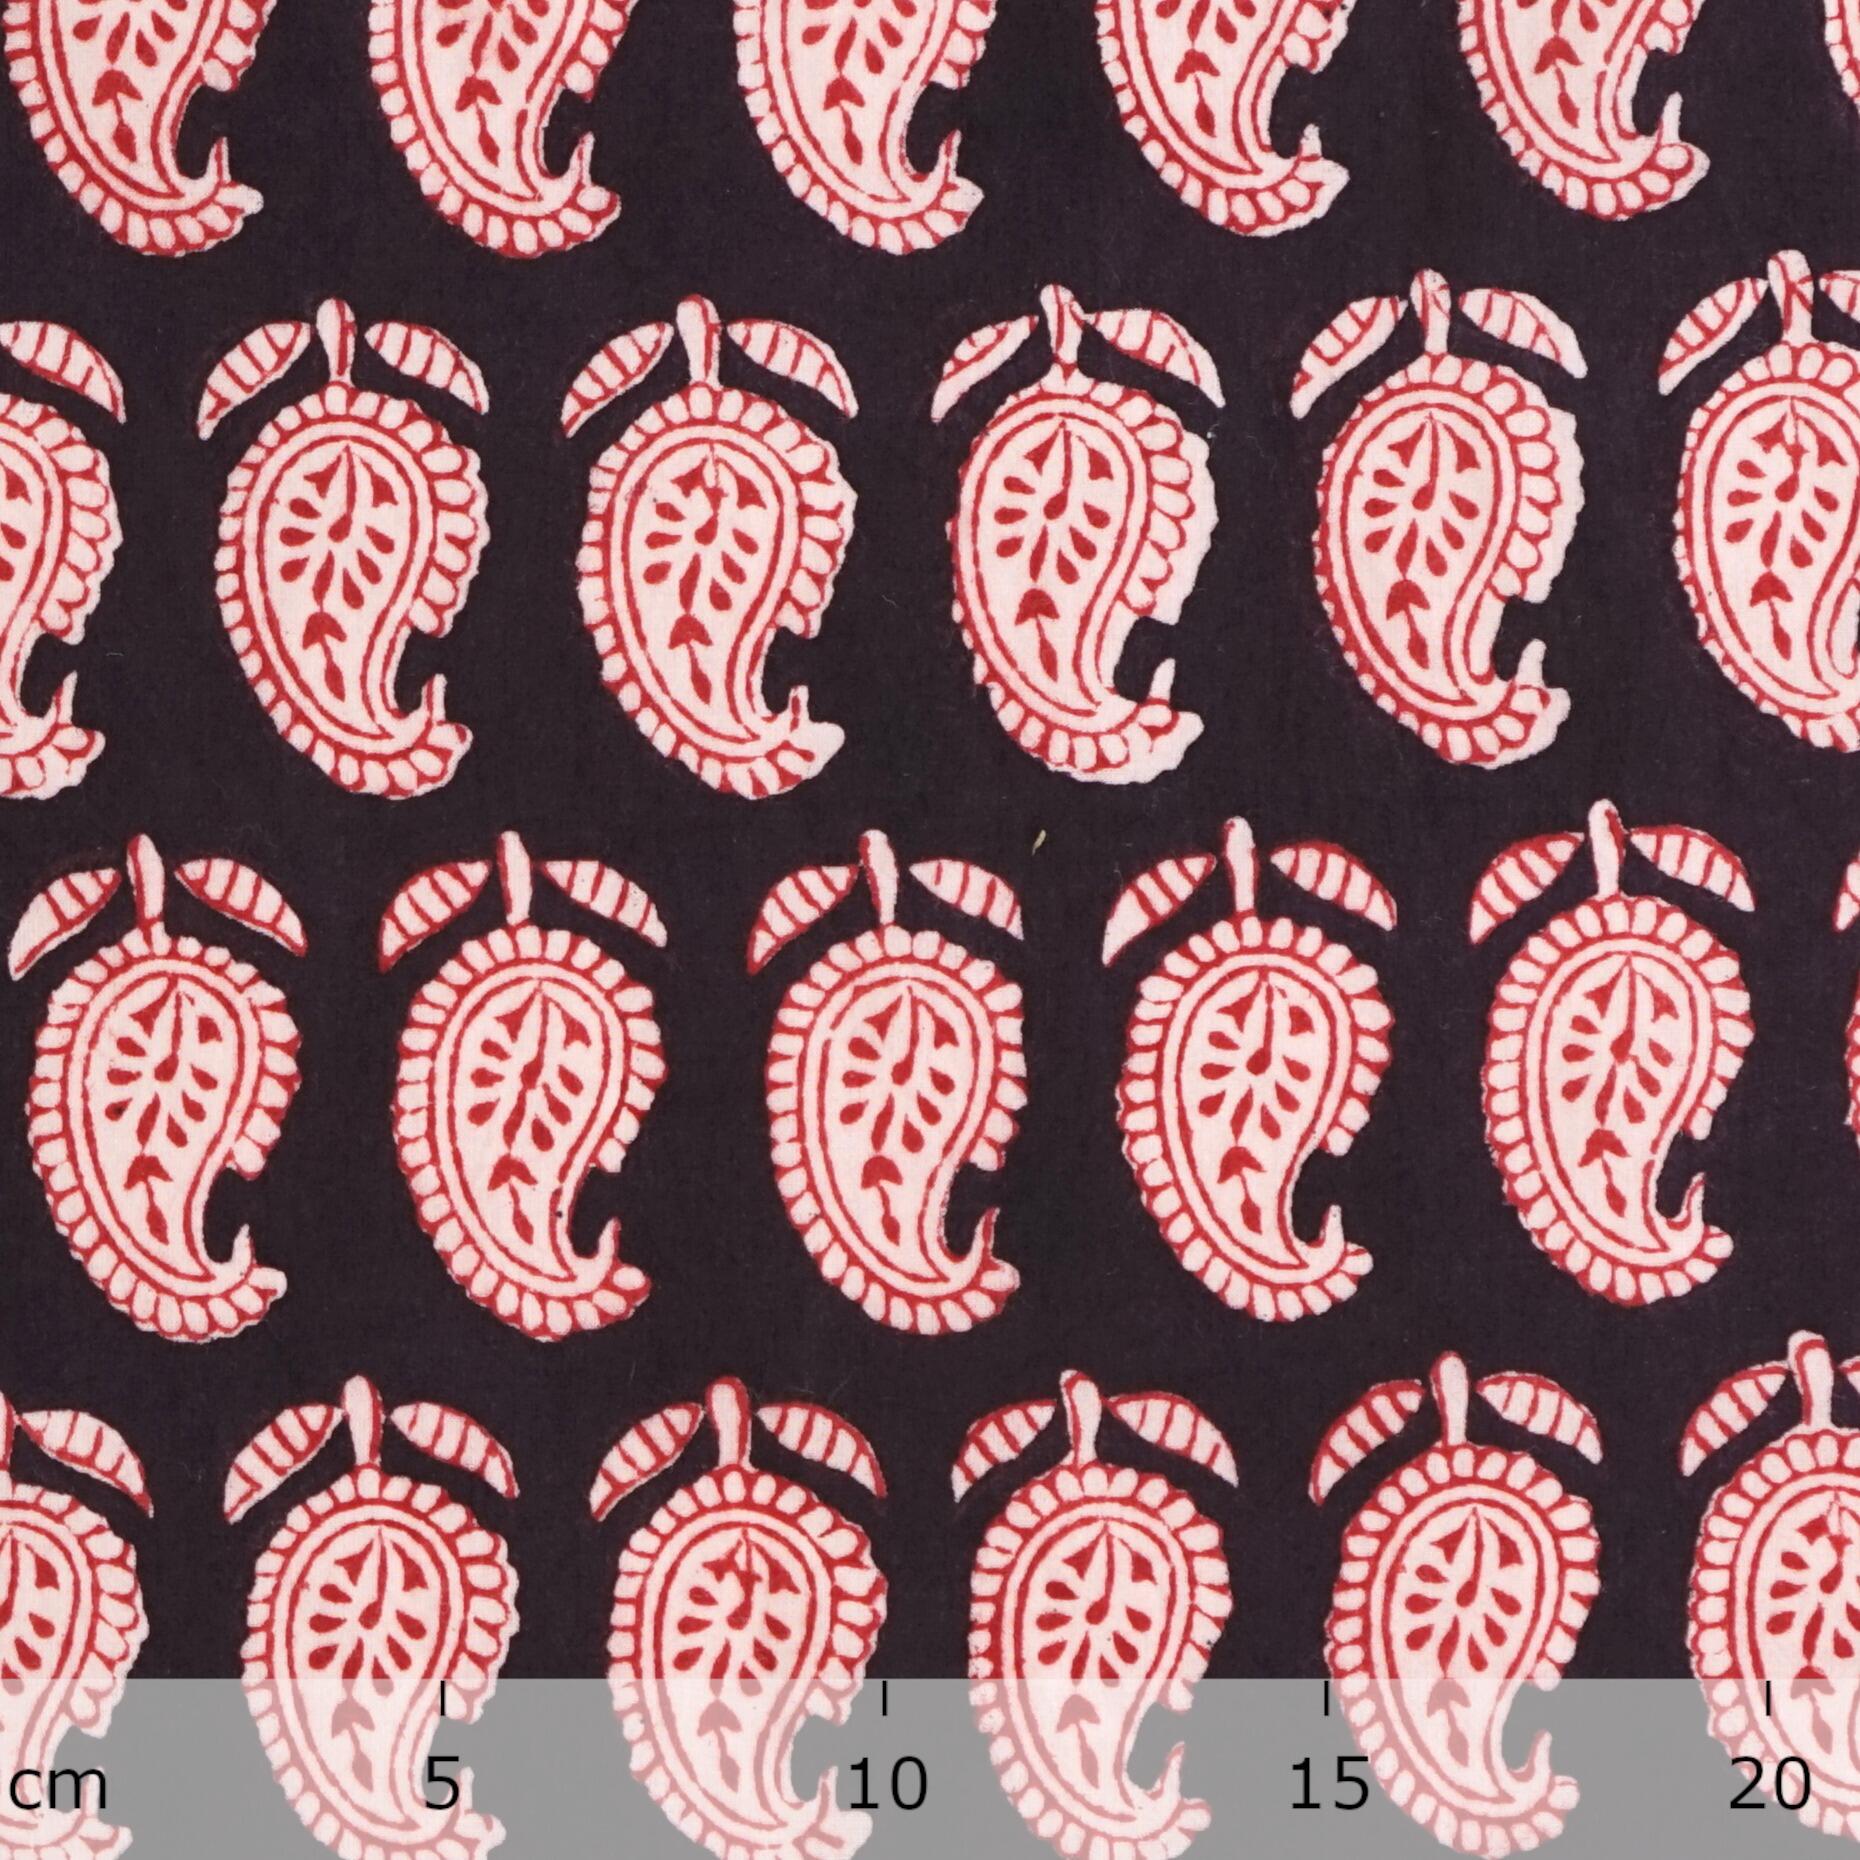 100% Block-Printed Cotton Fabric From India - Cactus Design - Iron Rust Black & Alizarin Red Dyes - Ruler